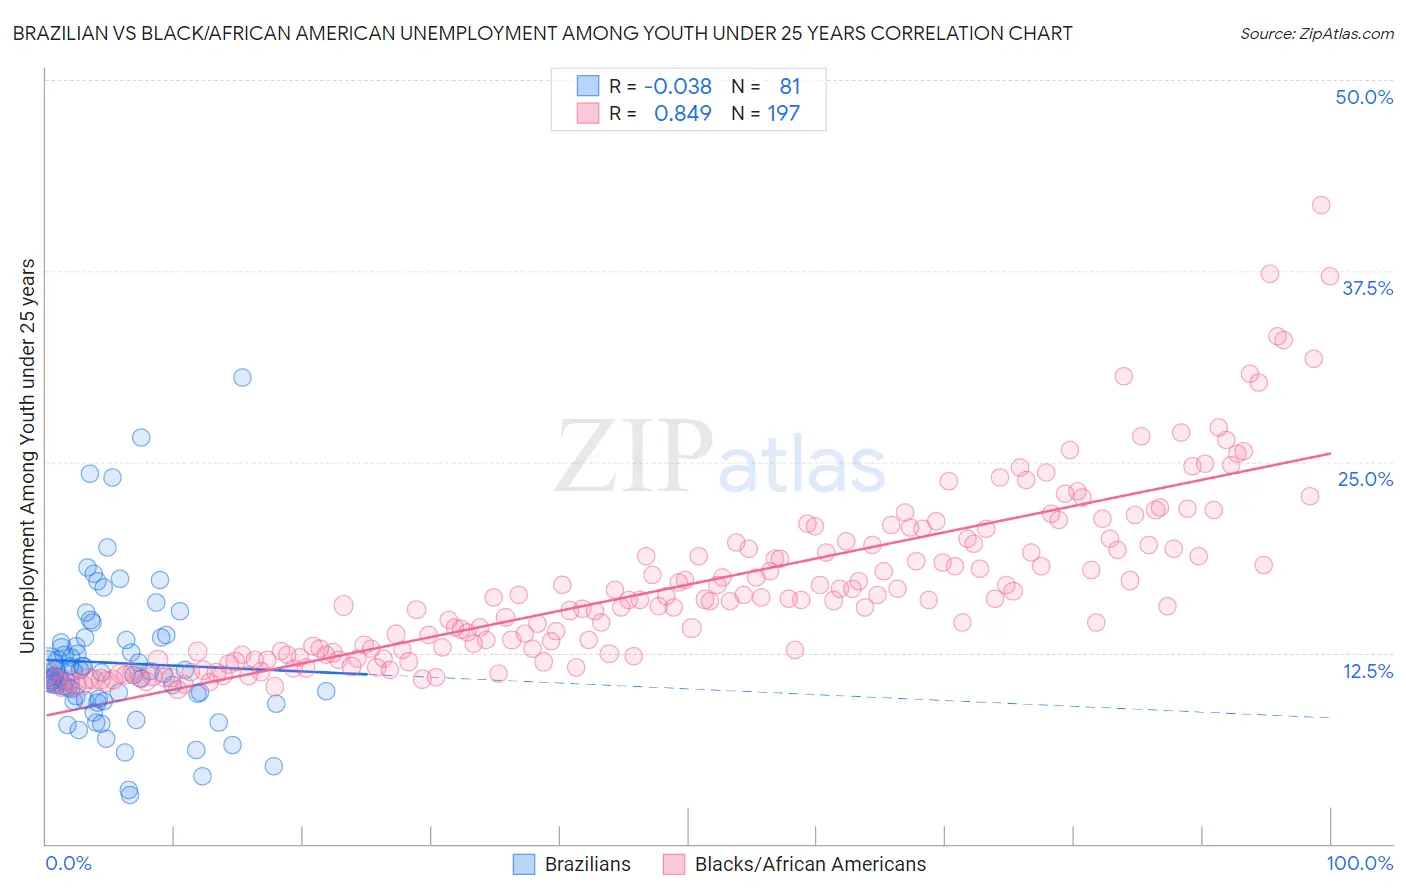 Brazilian vs Black/African American Unemployment Among Youth under 25 years